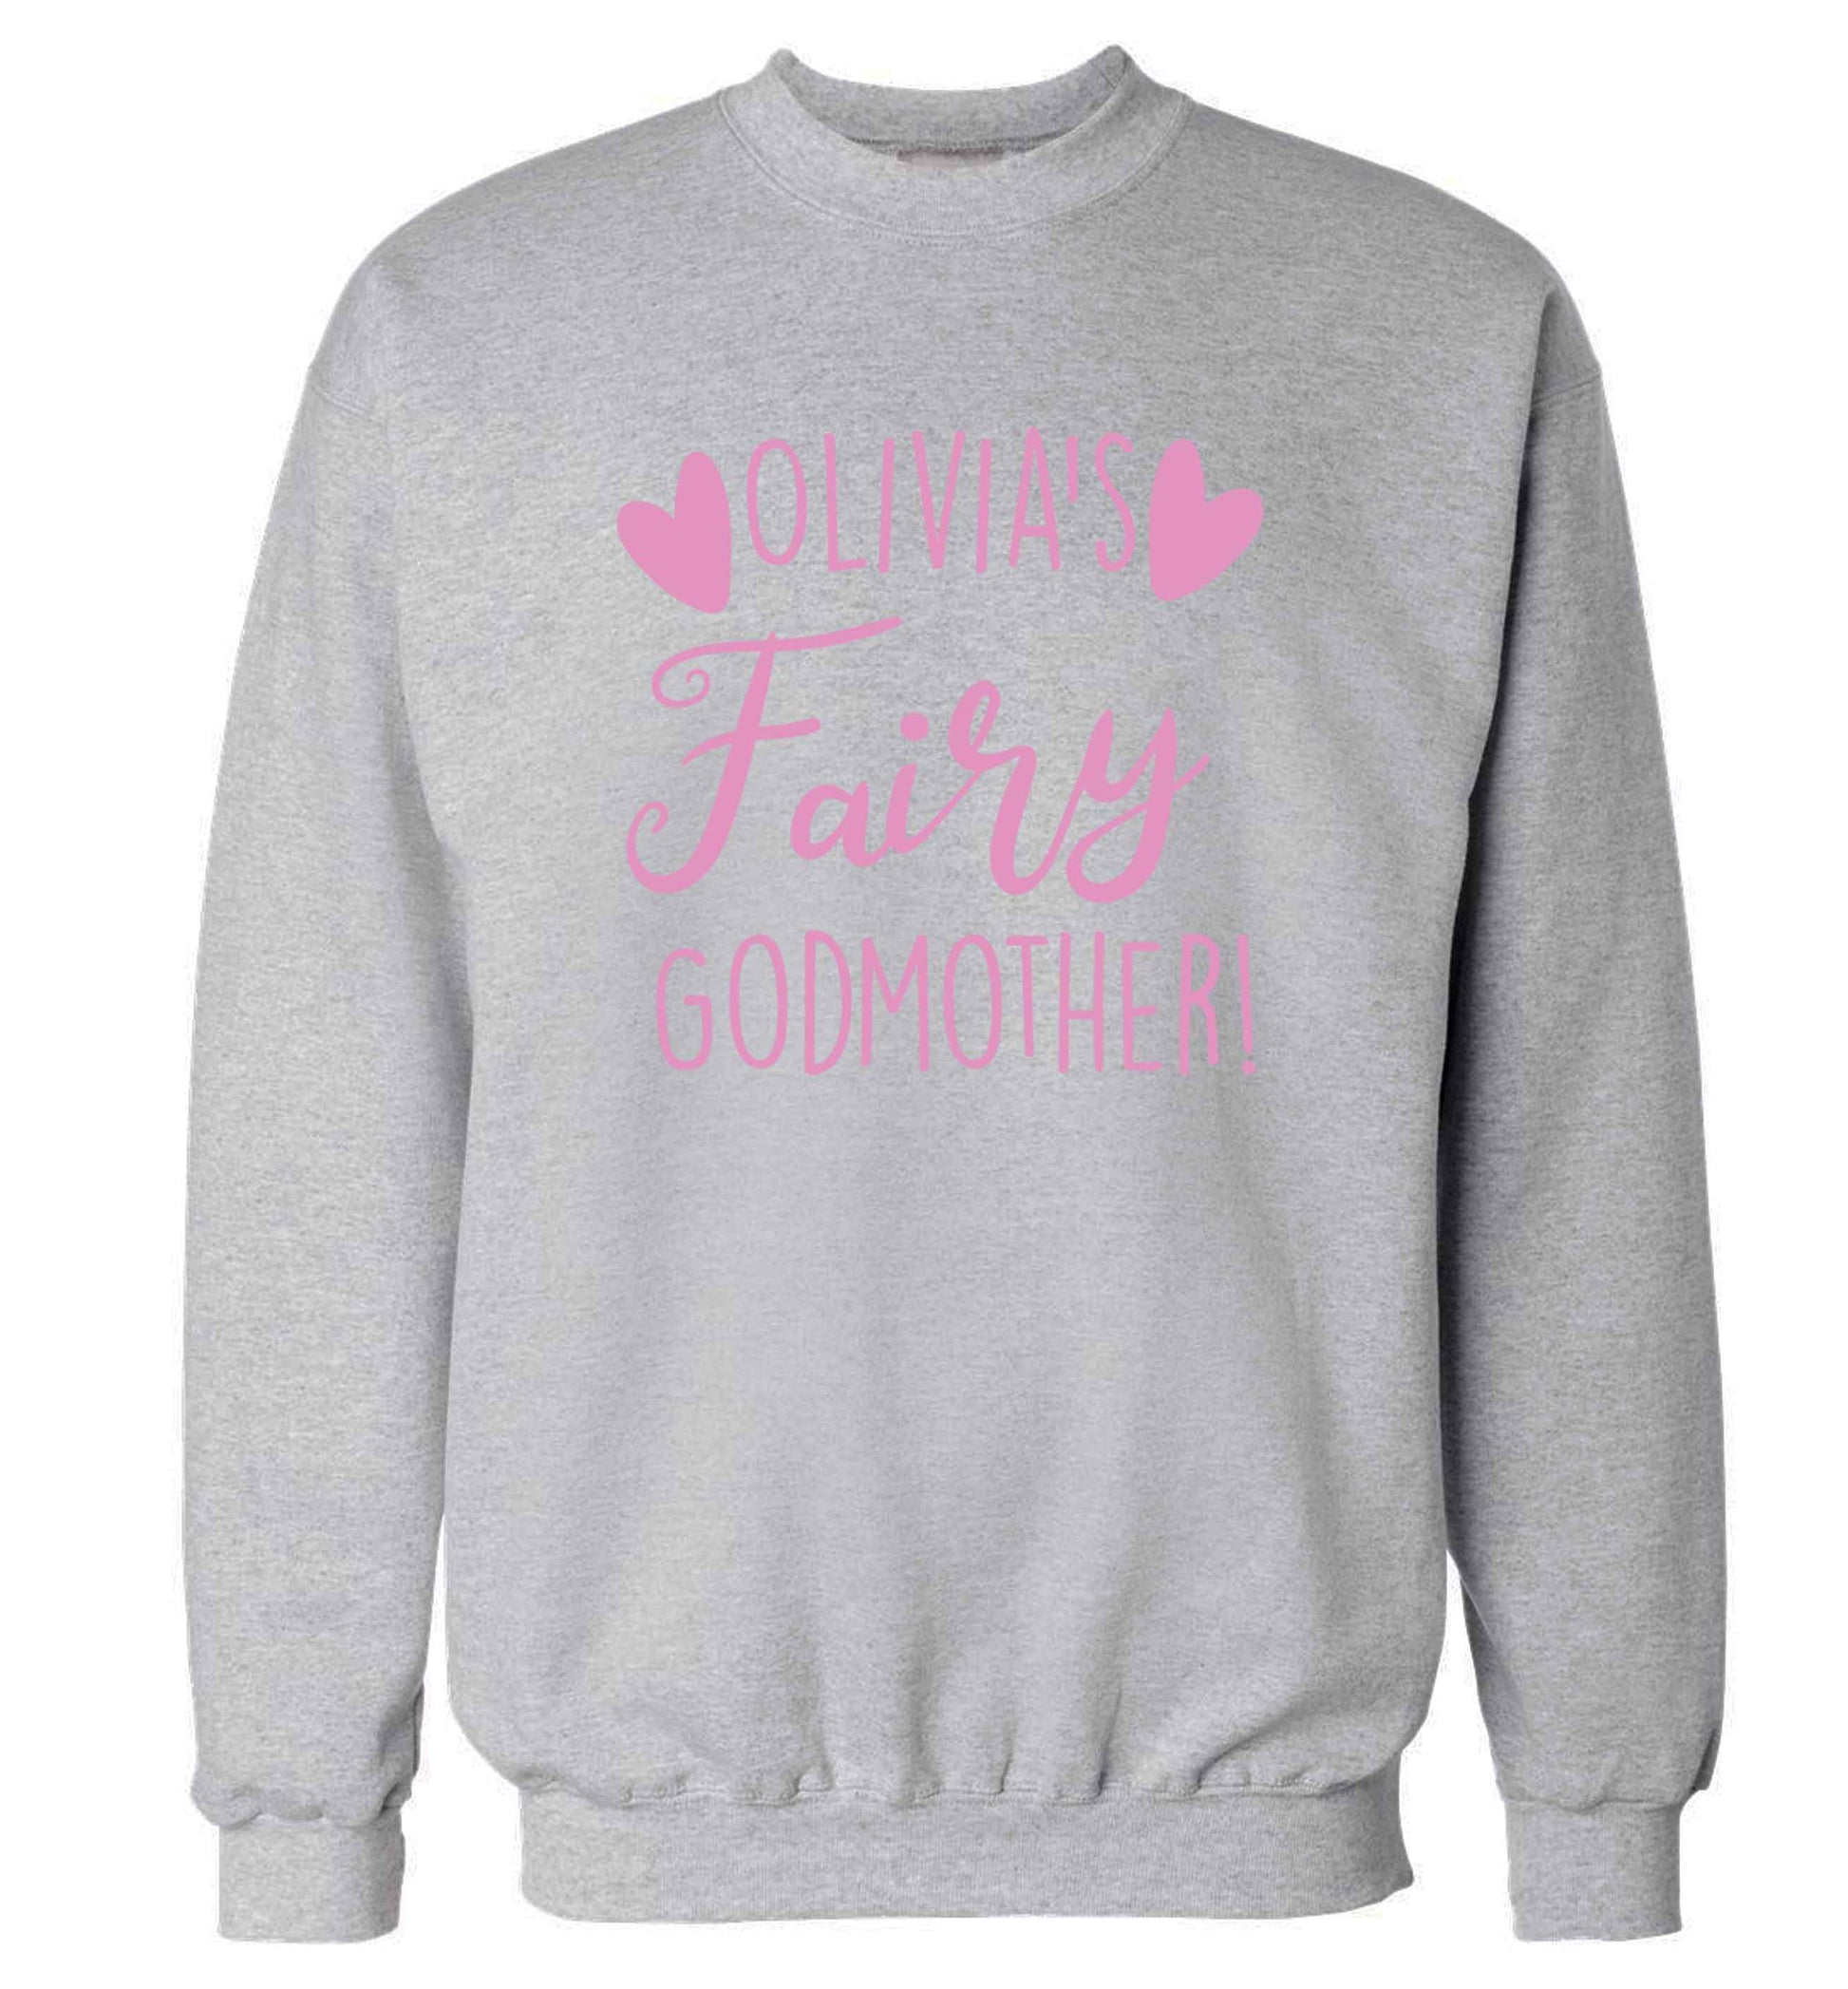 Personalised fairy Godmother adult's unisex grey sweater 2XL